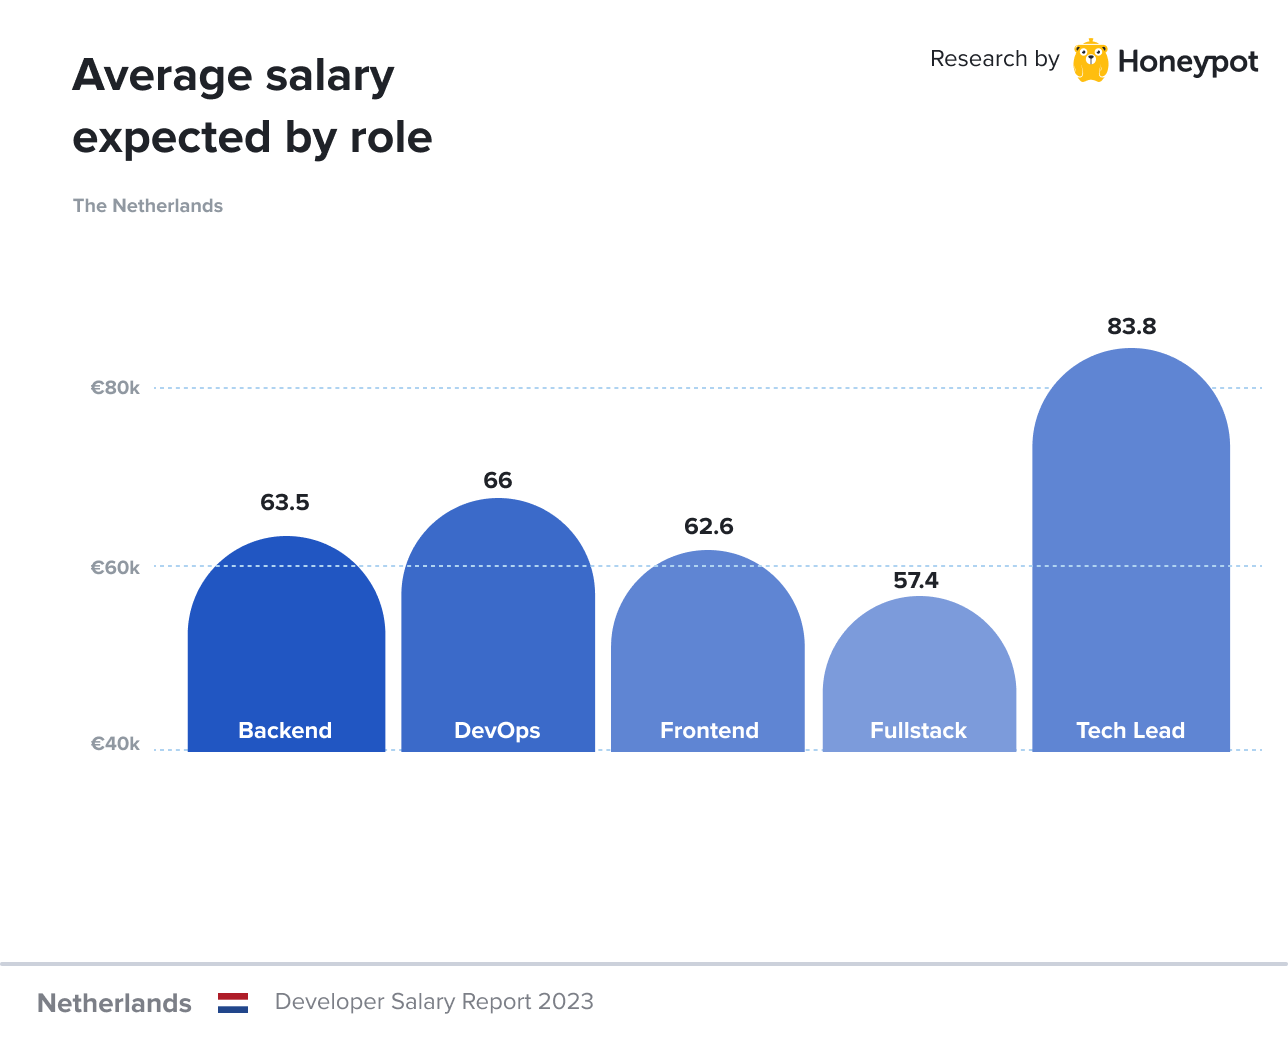 Graph showing average expected developer salary per tech role in the Netherlands